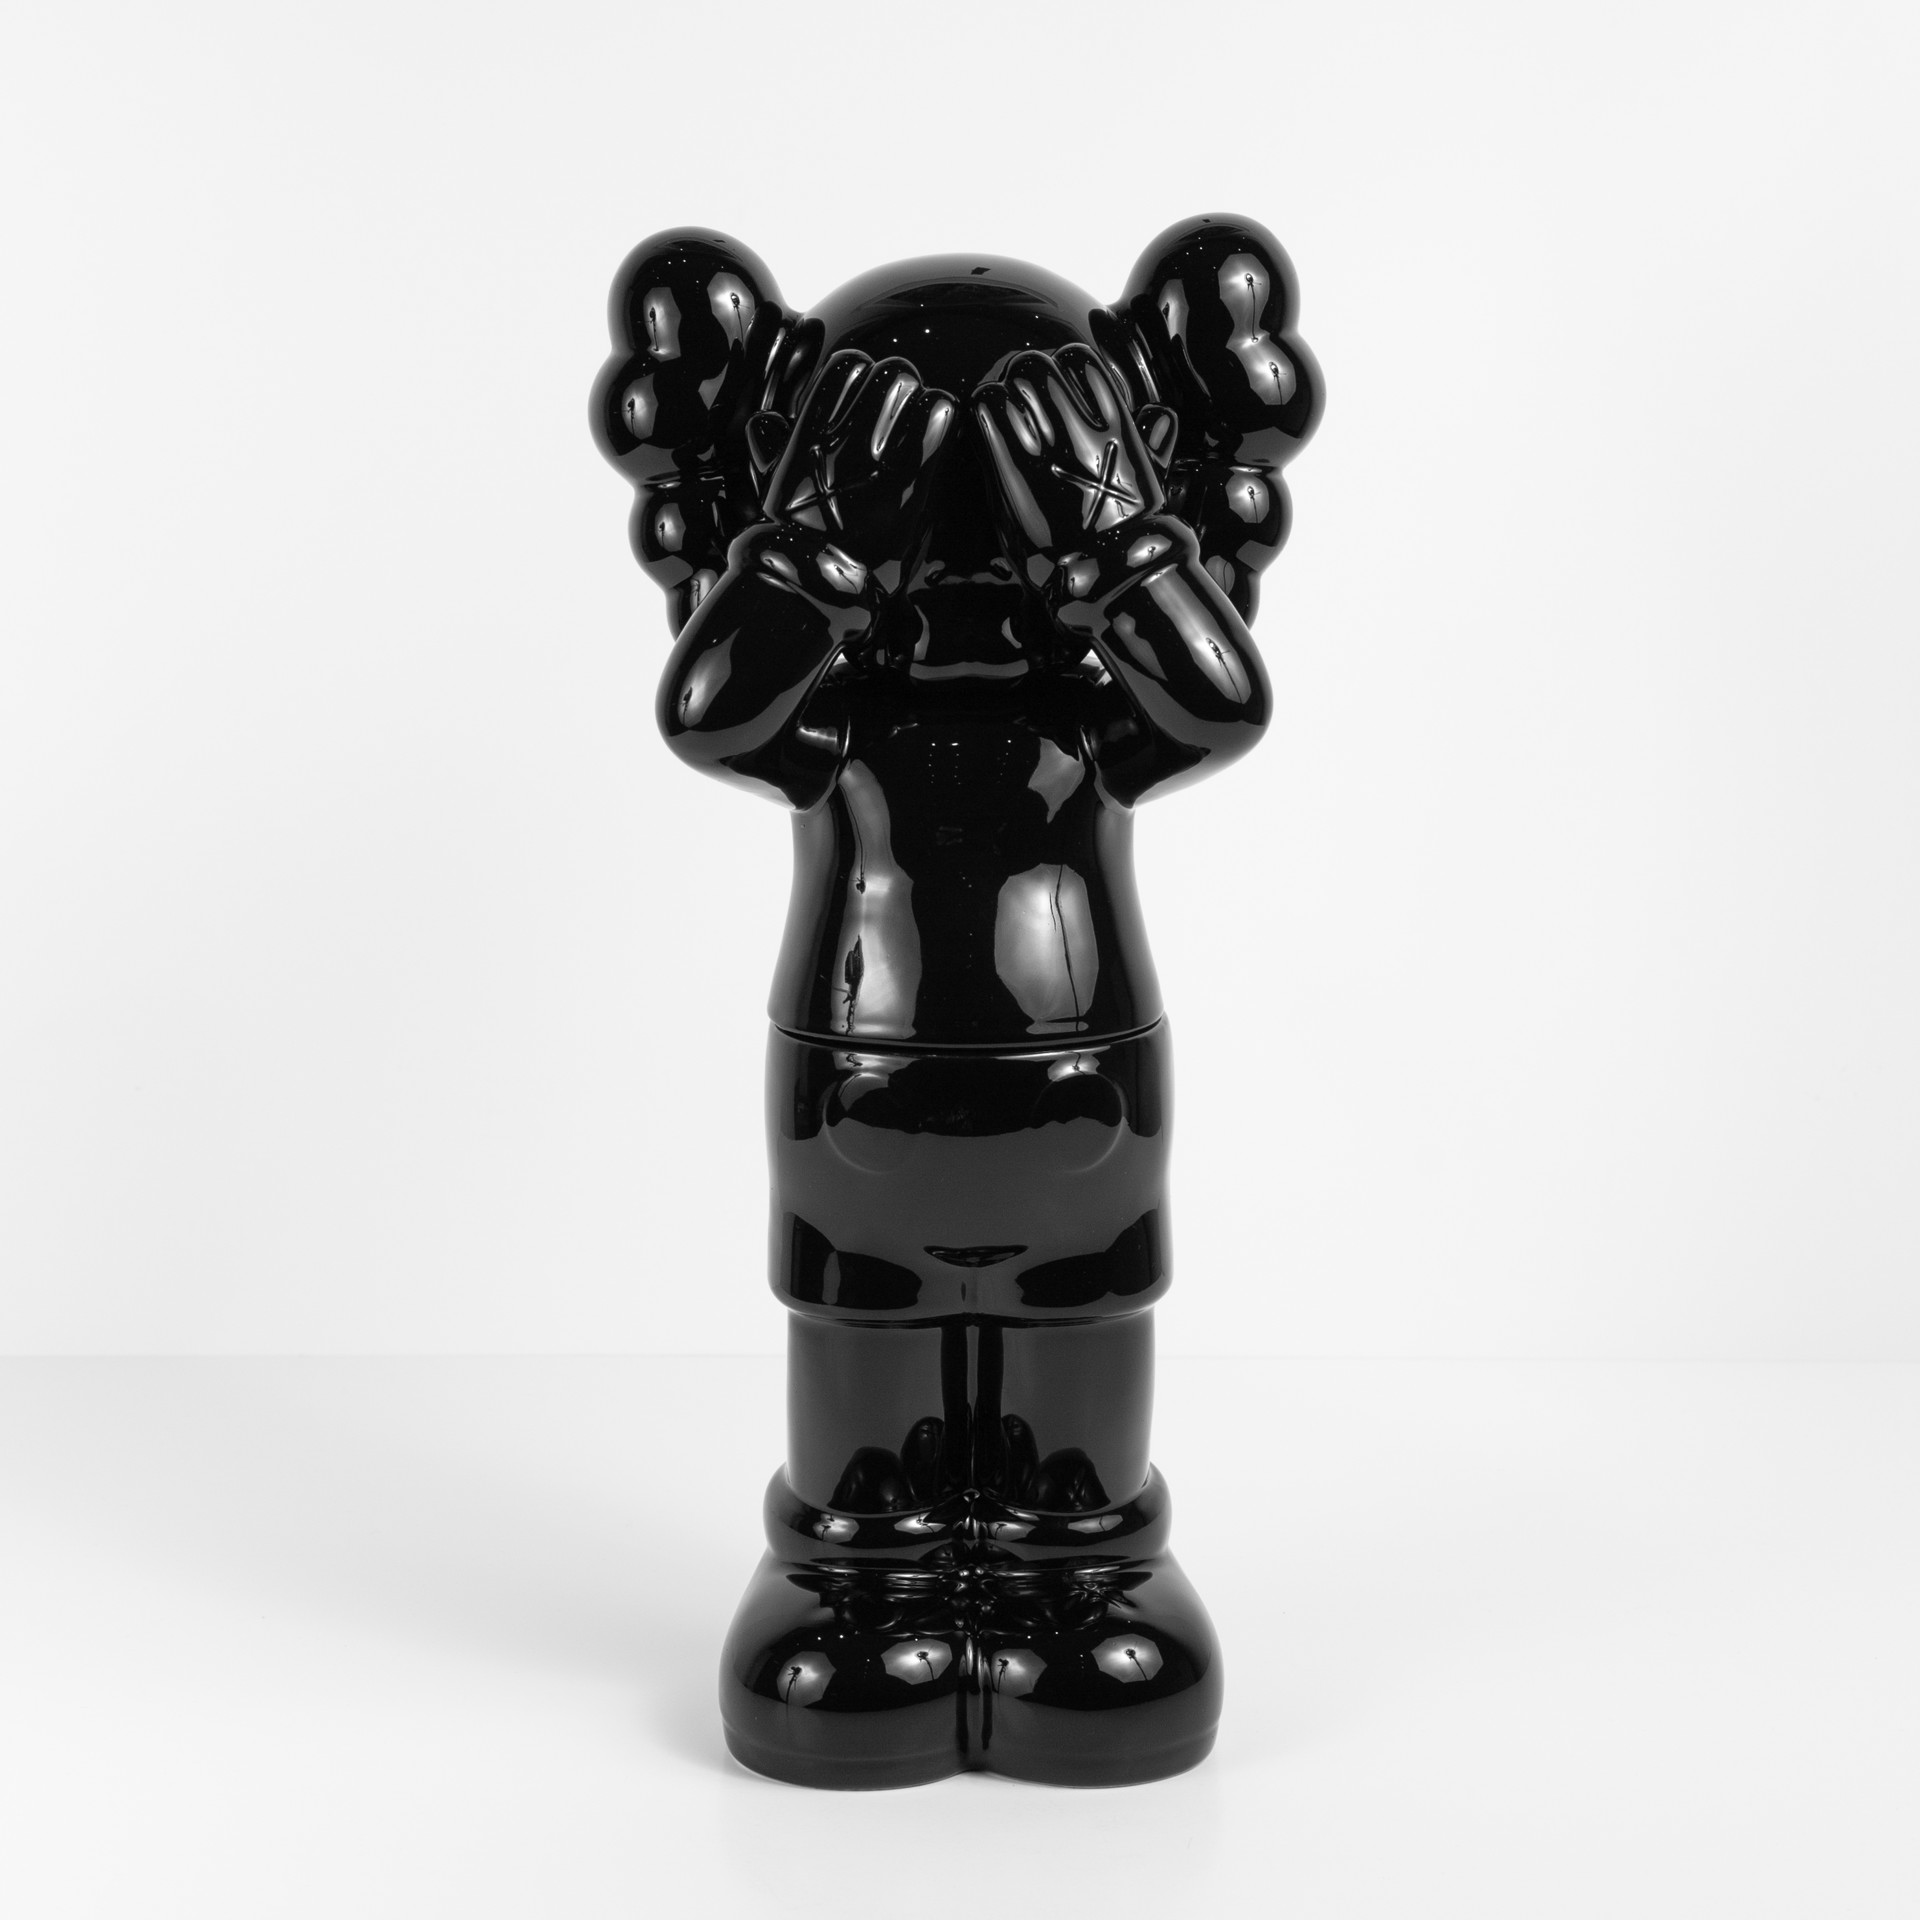 'Holiday UK' Ceramic Containers by Kaws